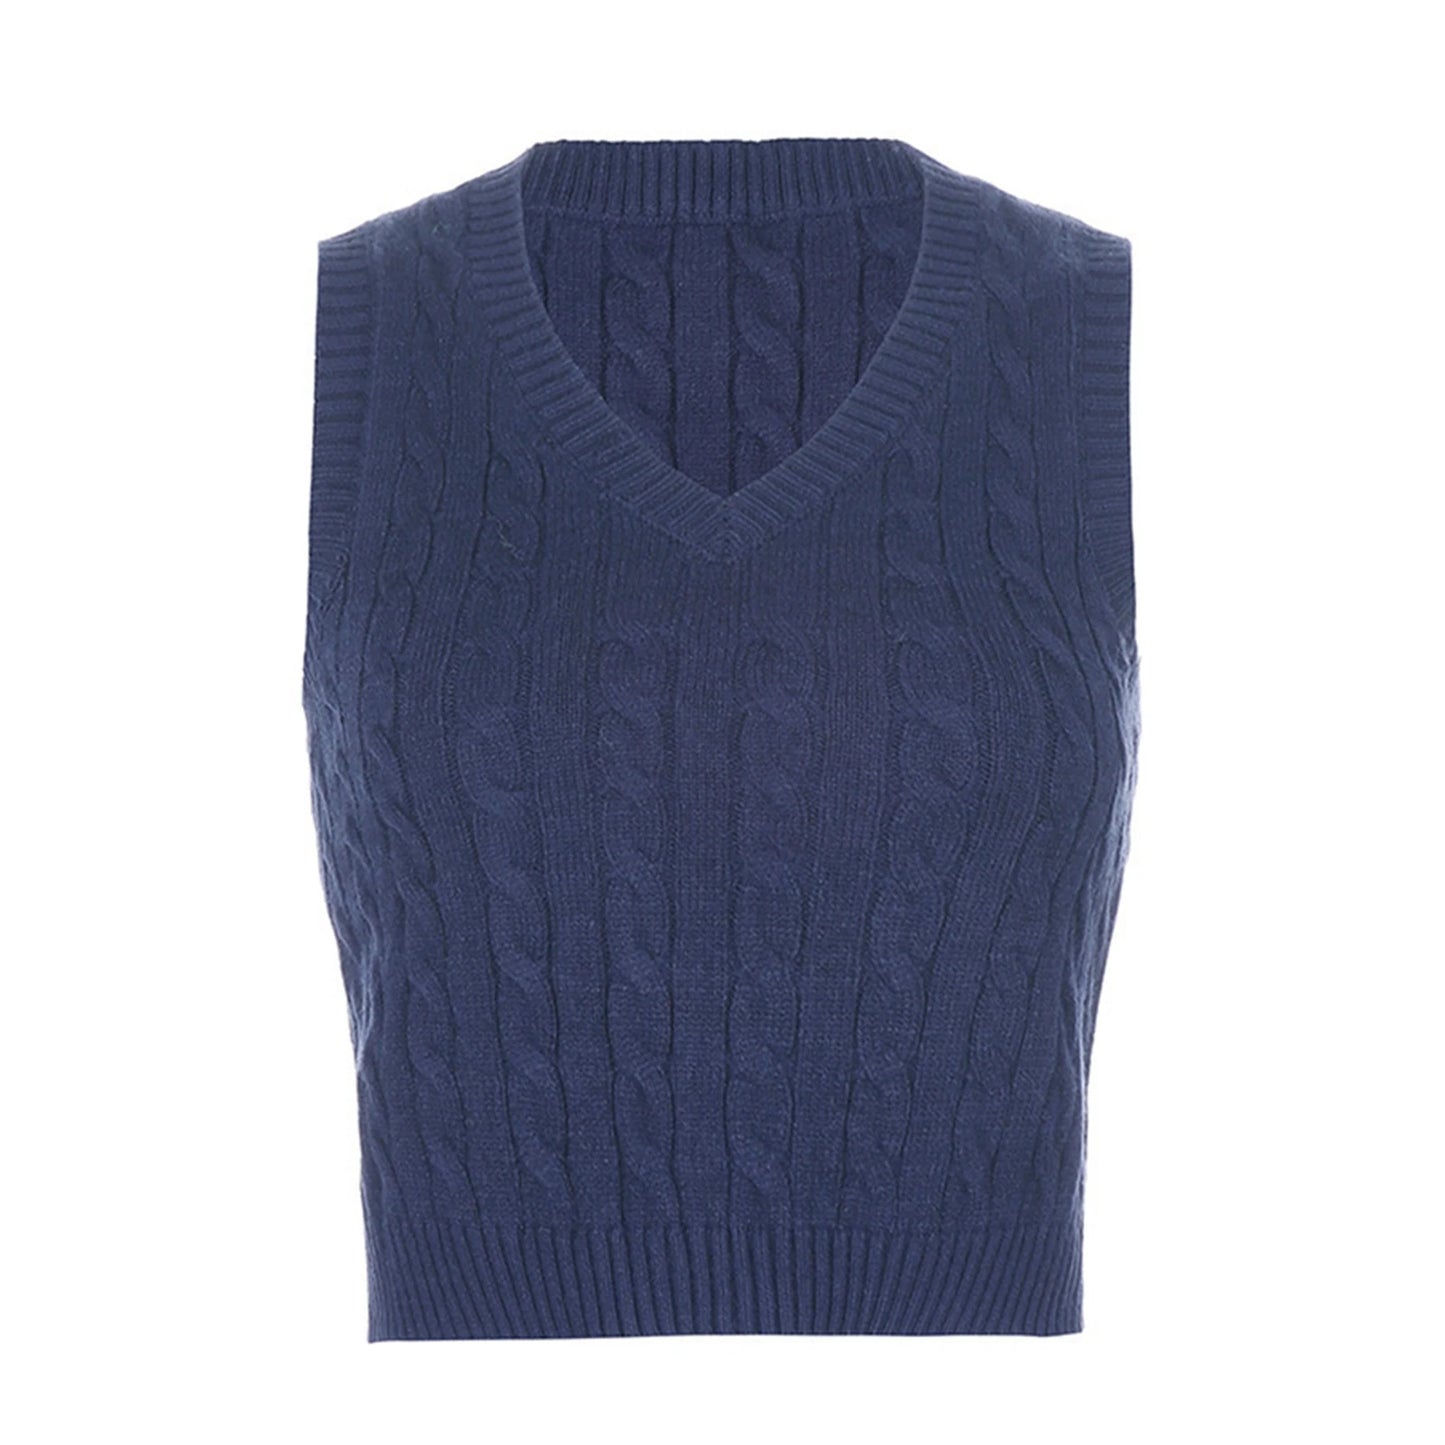 A&A Sweater V-Neck Retro Style Sleeveless Pullover